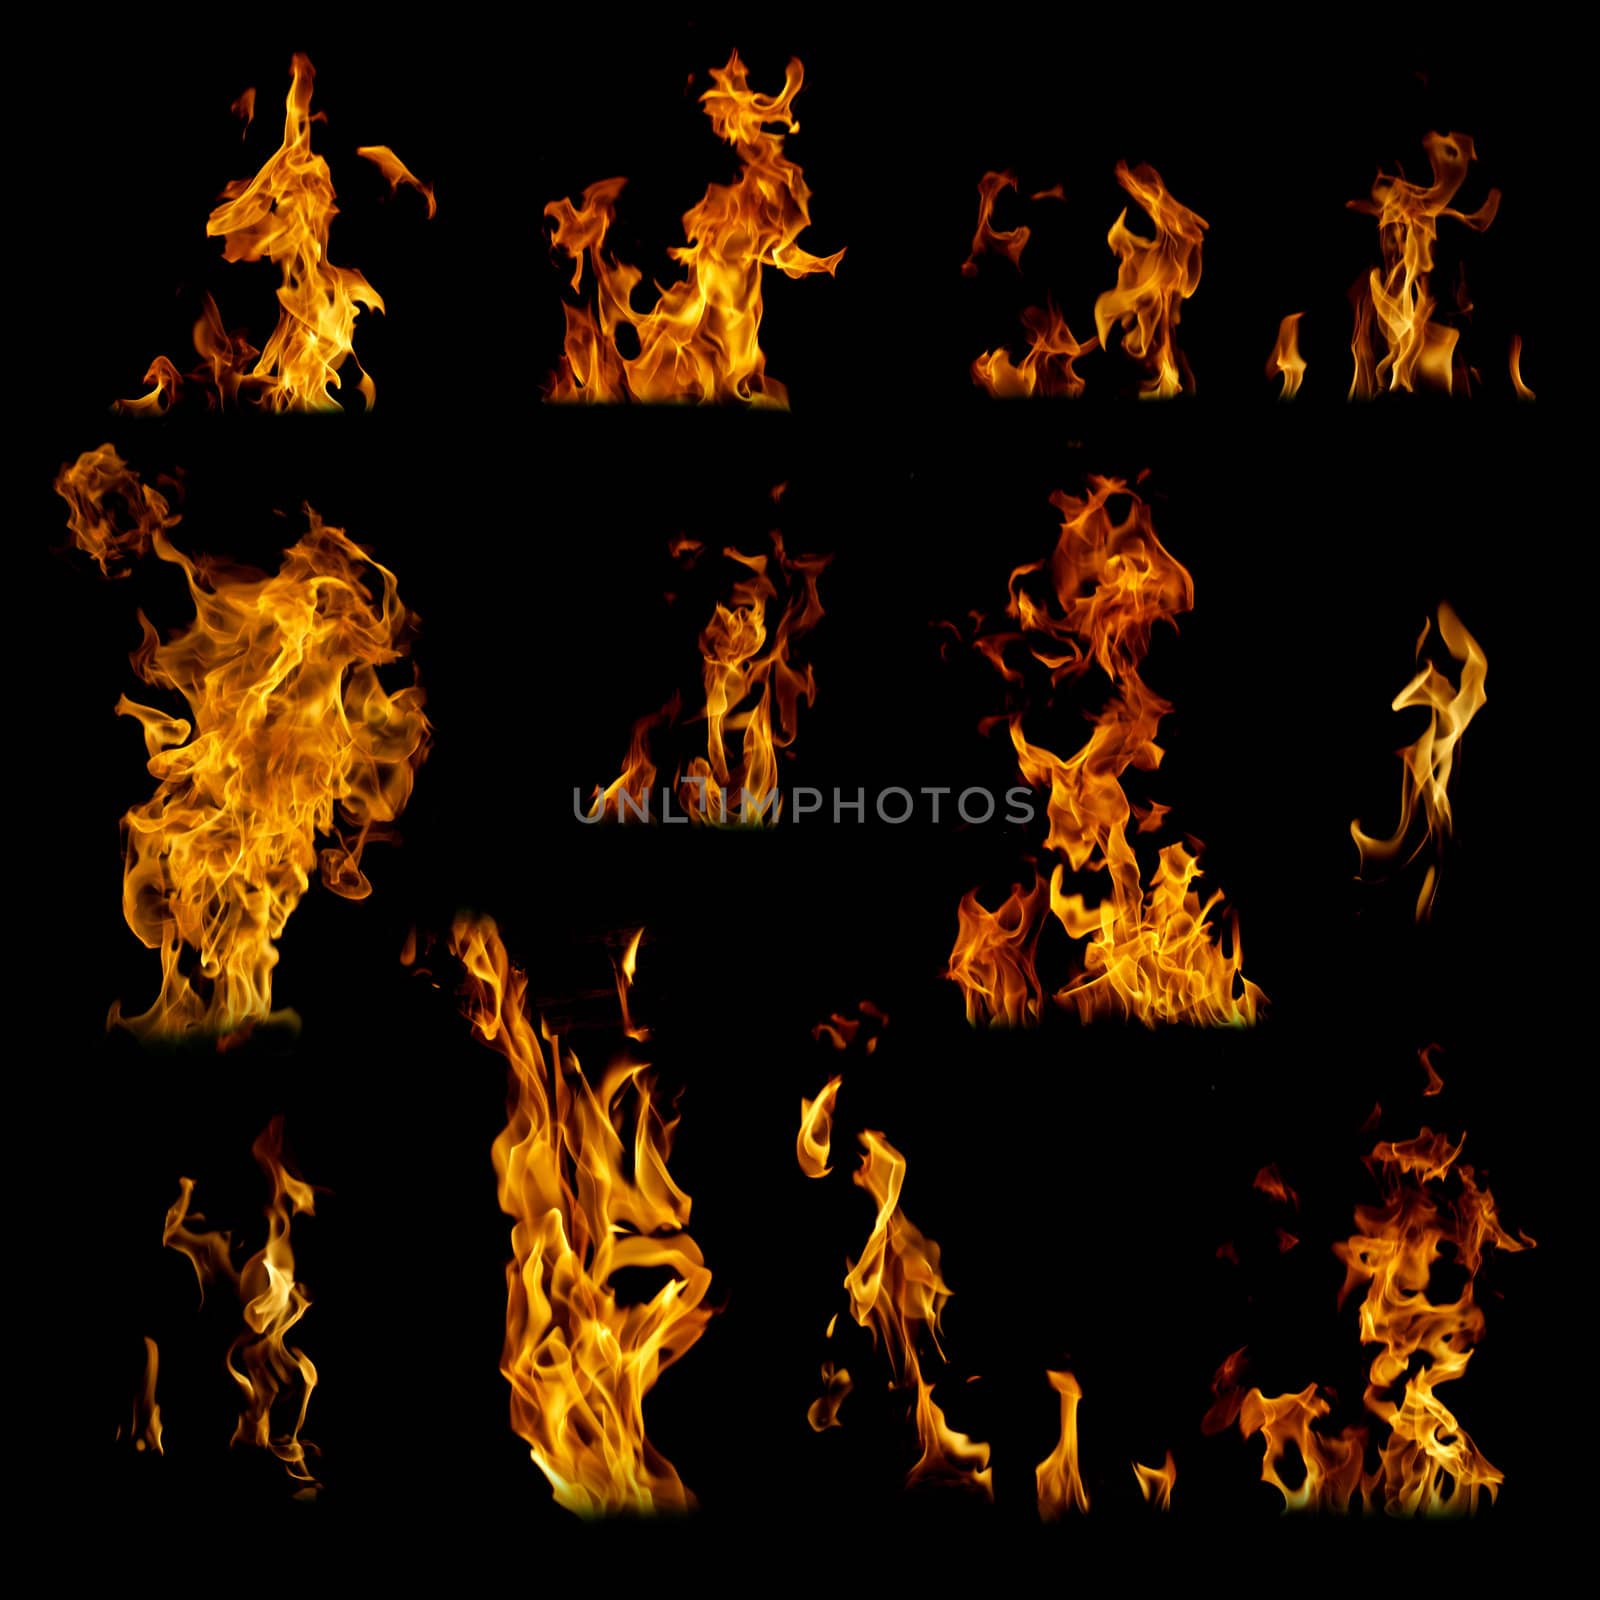 Assorted fire, flames collection on black background 